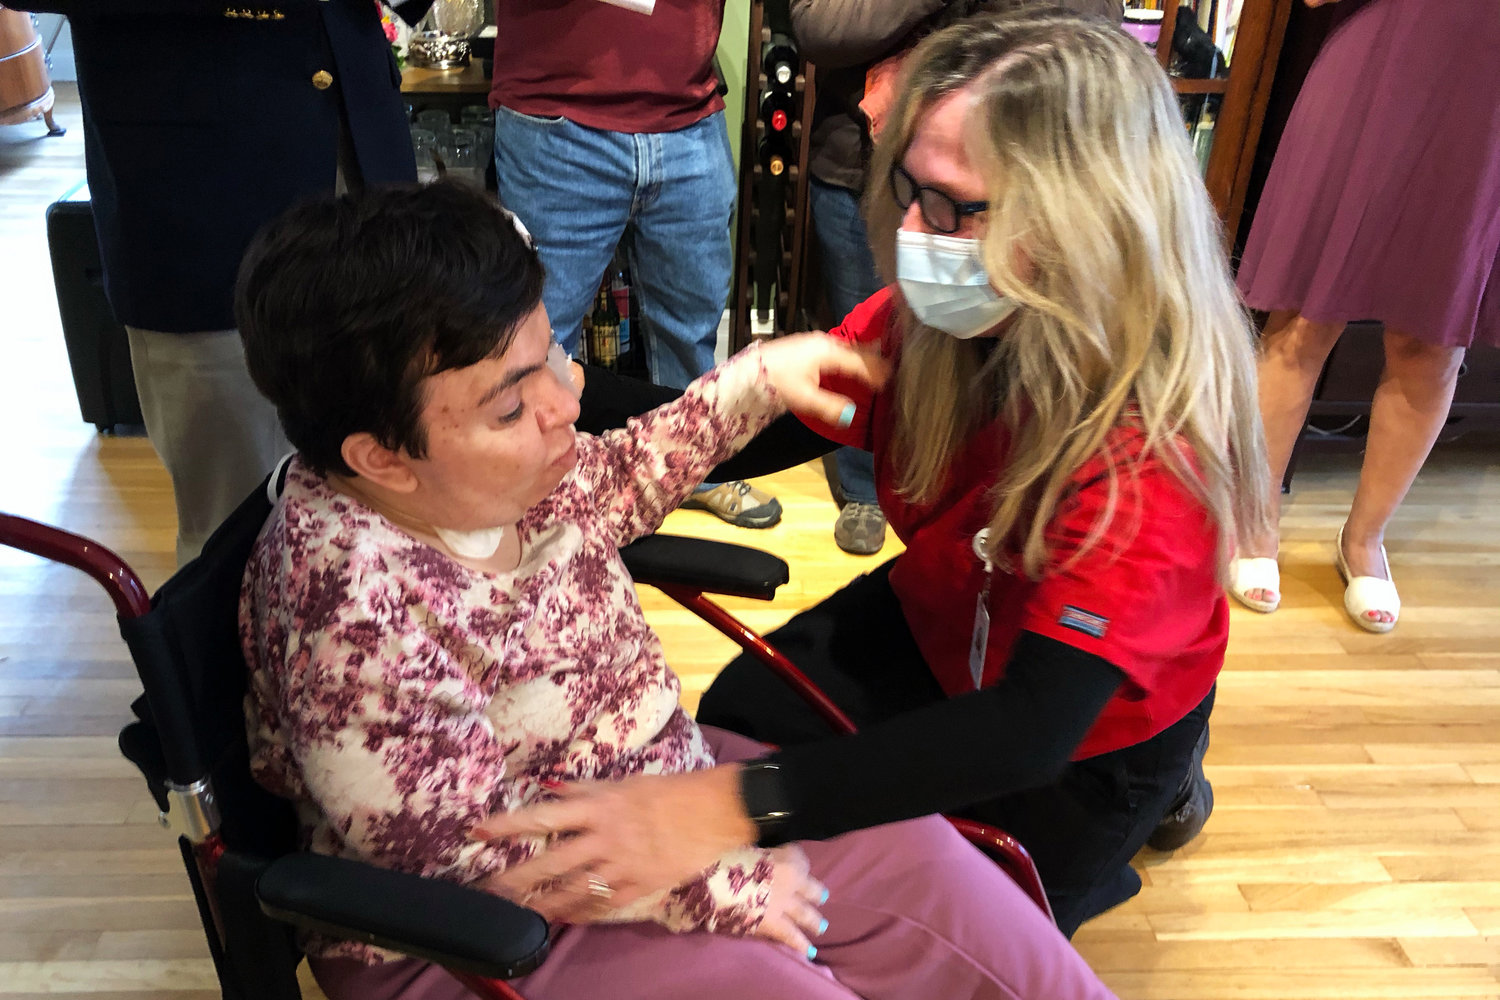 Lauren Wechsler, left, and Nancy Lonergan embrace after Lauren was presented with an honorary nursing certificate. Lauren dreamed of attending Columbia School of Nursing, but was never able to because of severe mental and physical disabilities.